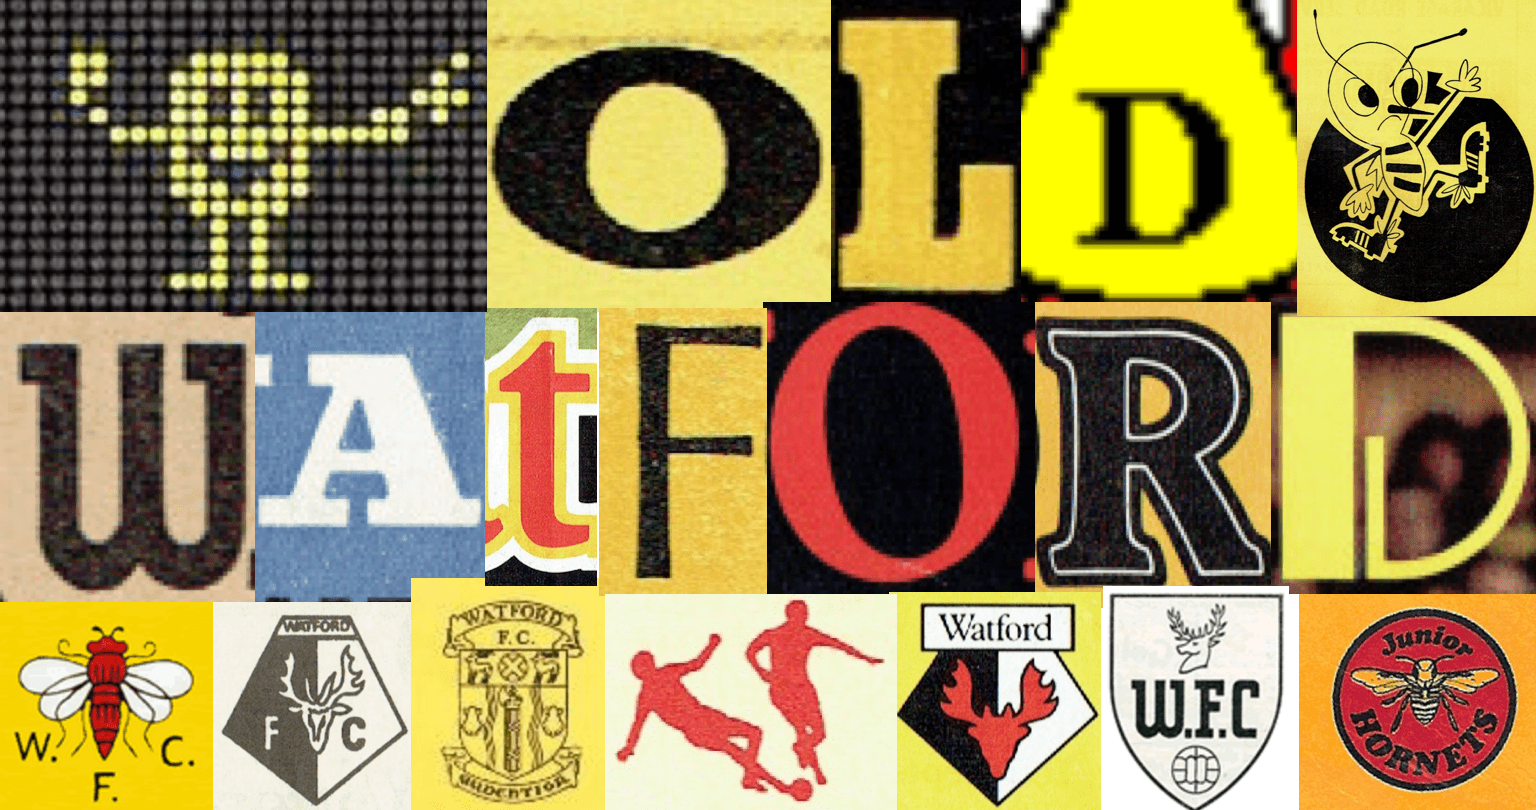 3CR RSS Logo - Old Watford – Old Watford is a day by day scrapbook style history of ...